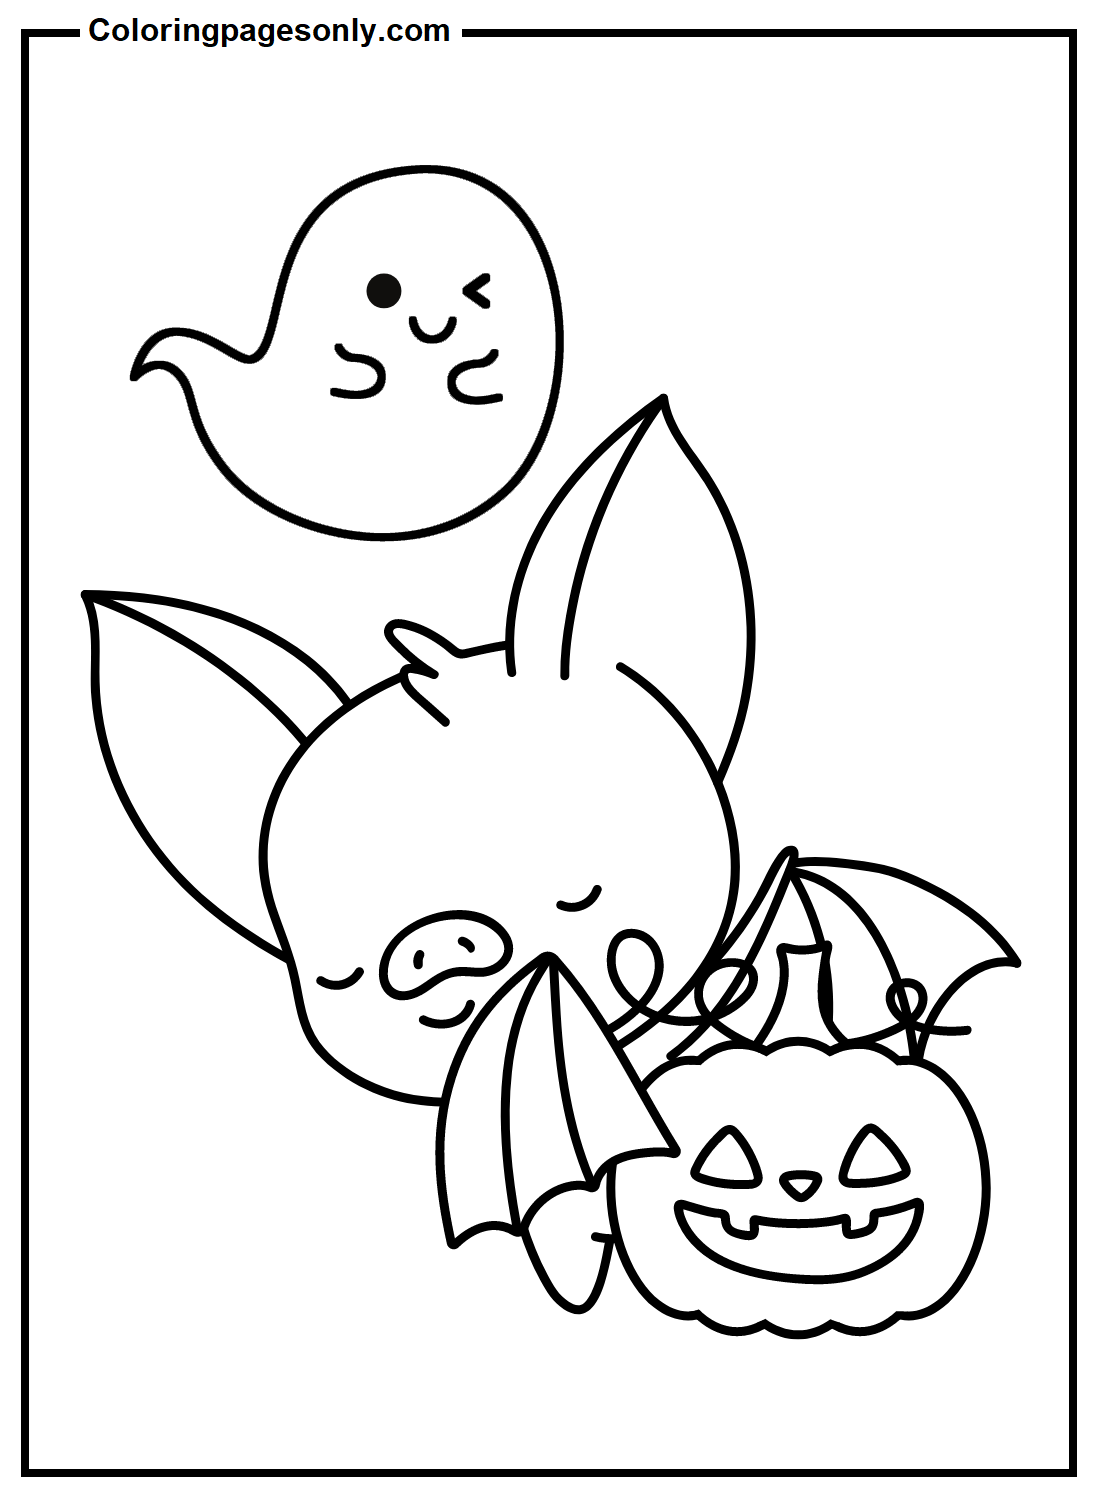 Cute Bat, Ghost, and Pumpkin Coloring Page